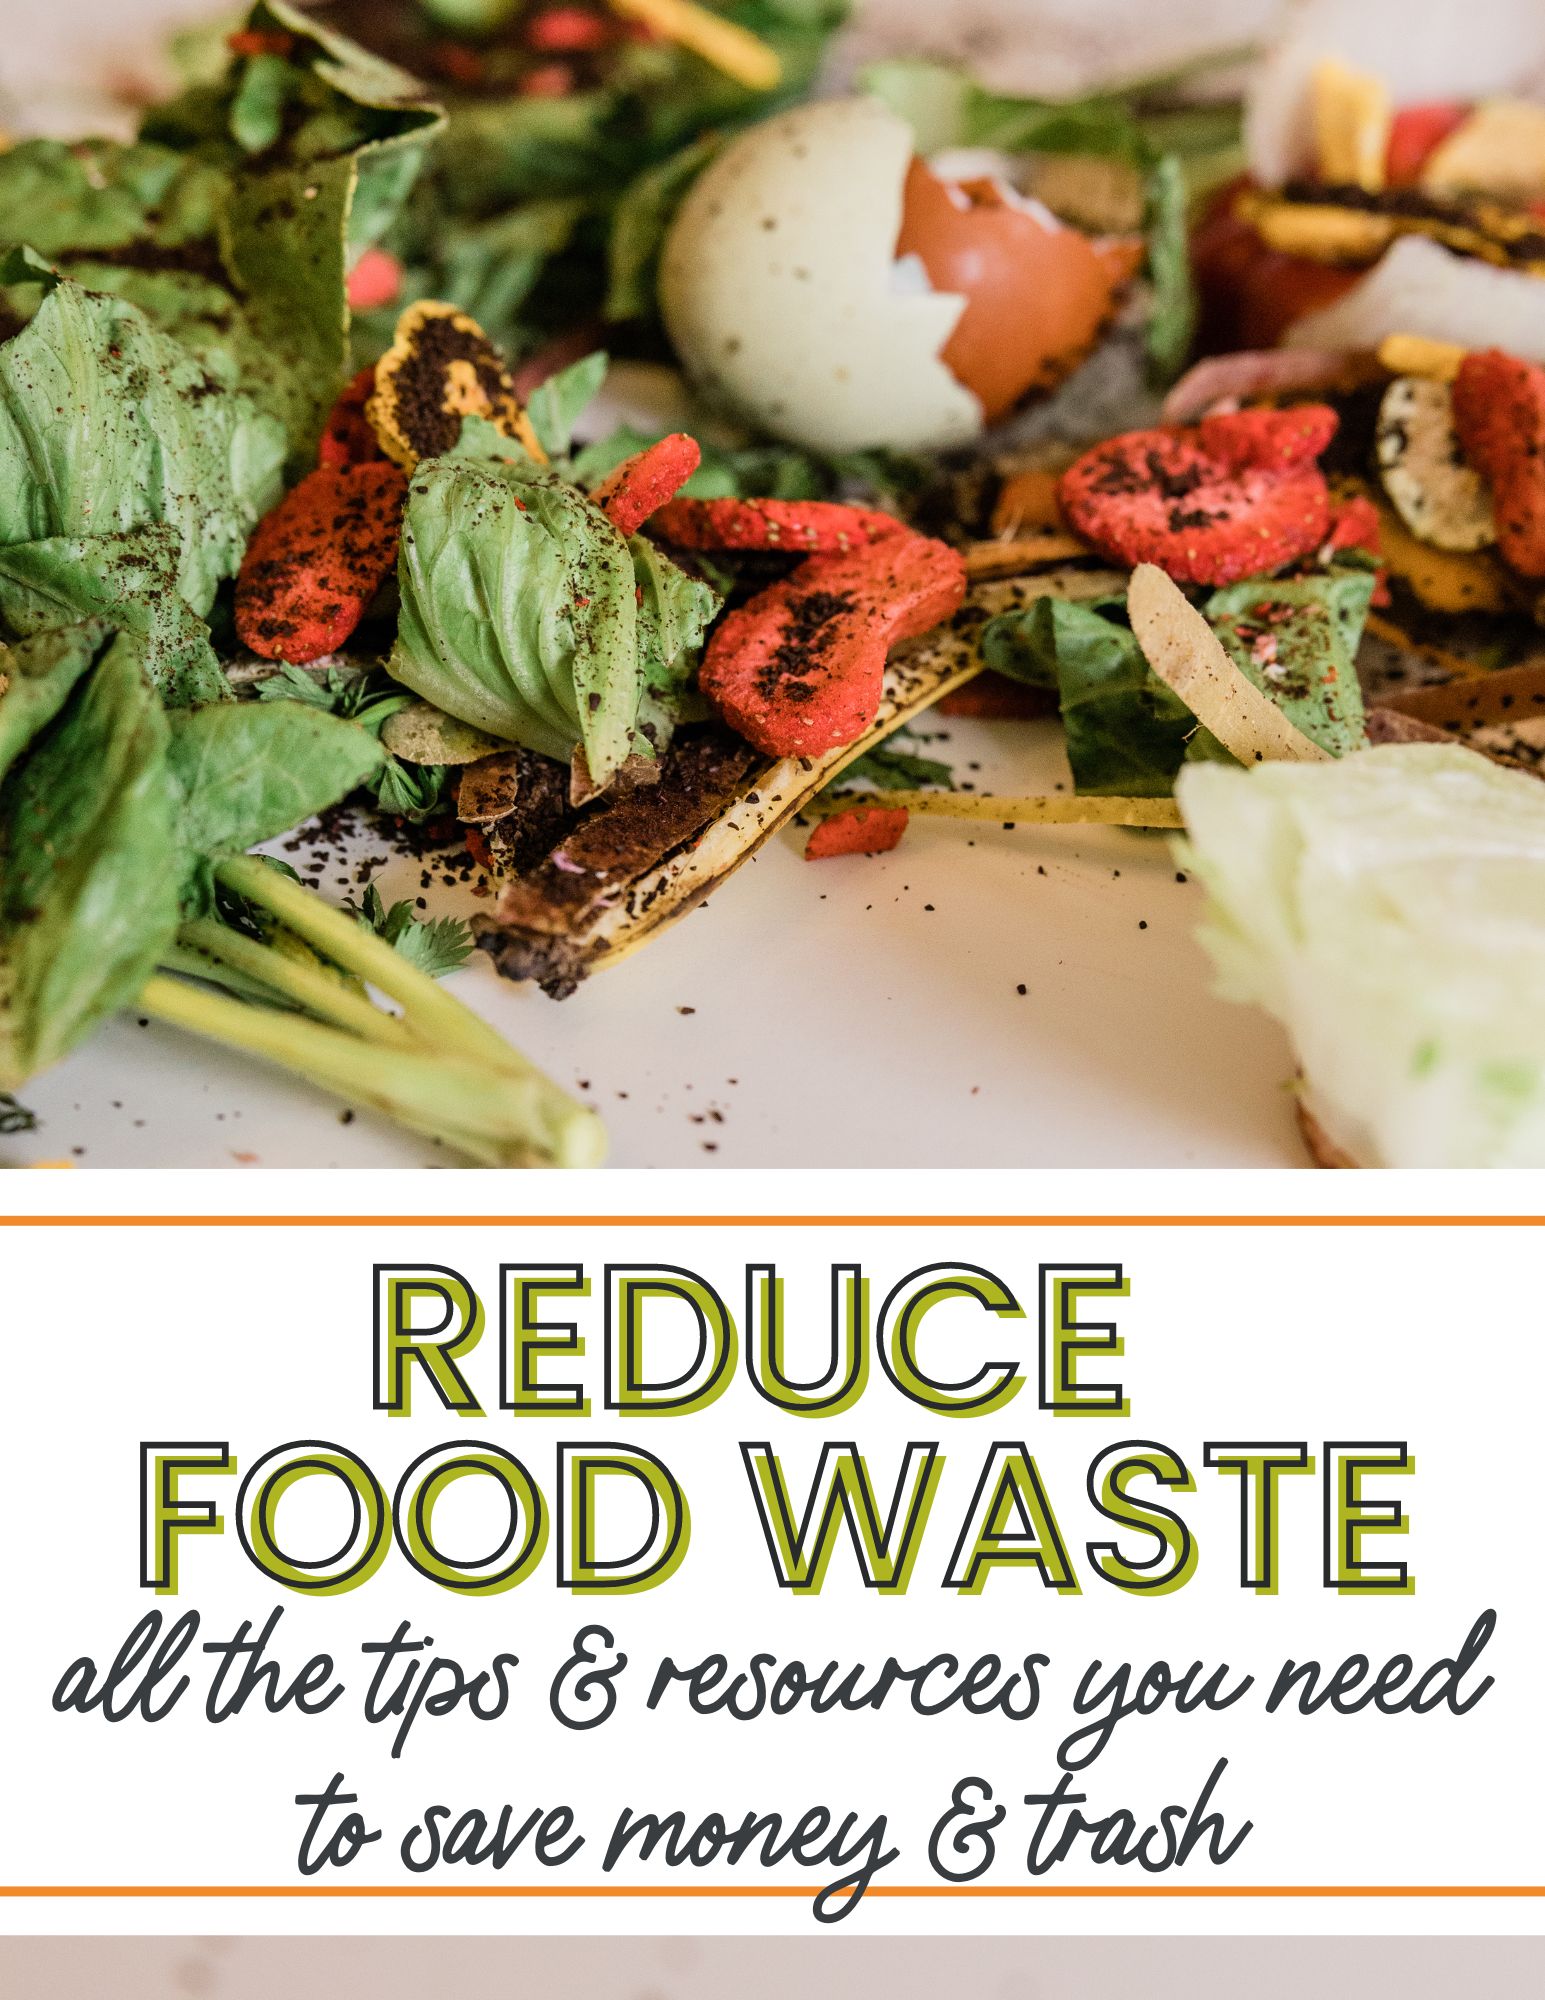 reduce food waste and save money with these tips and resources